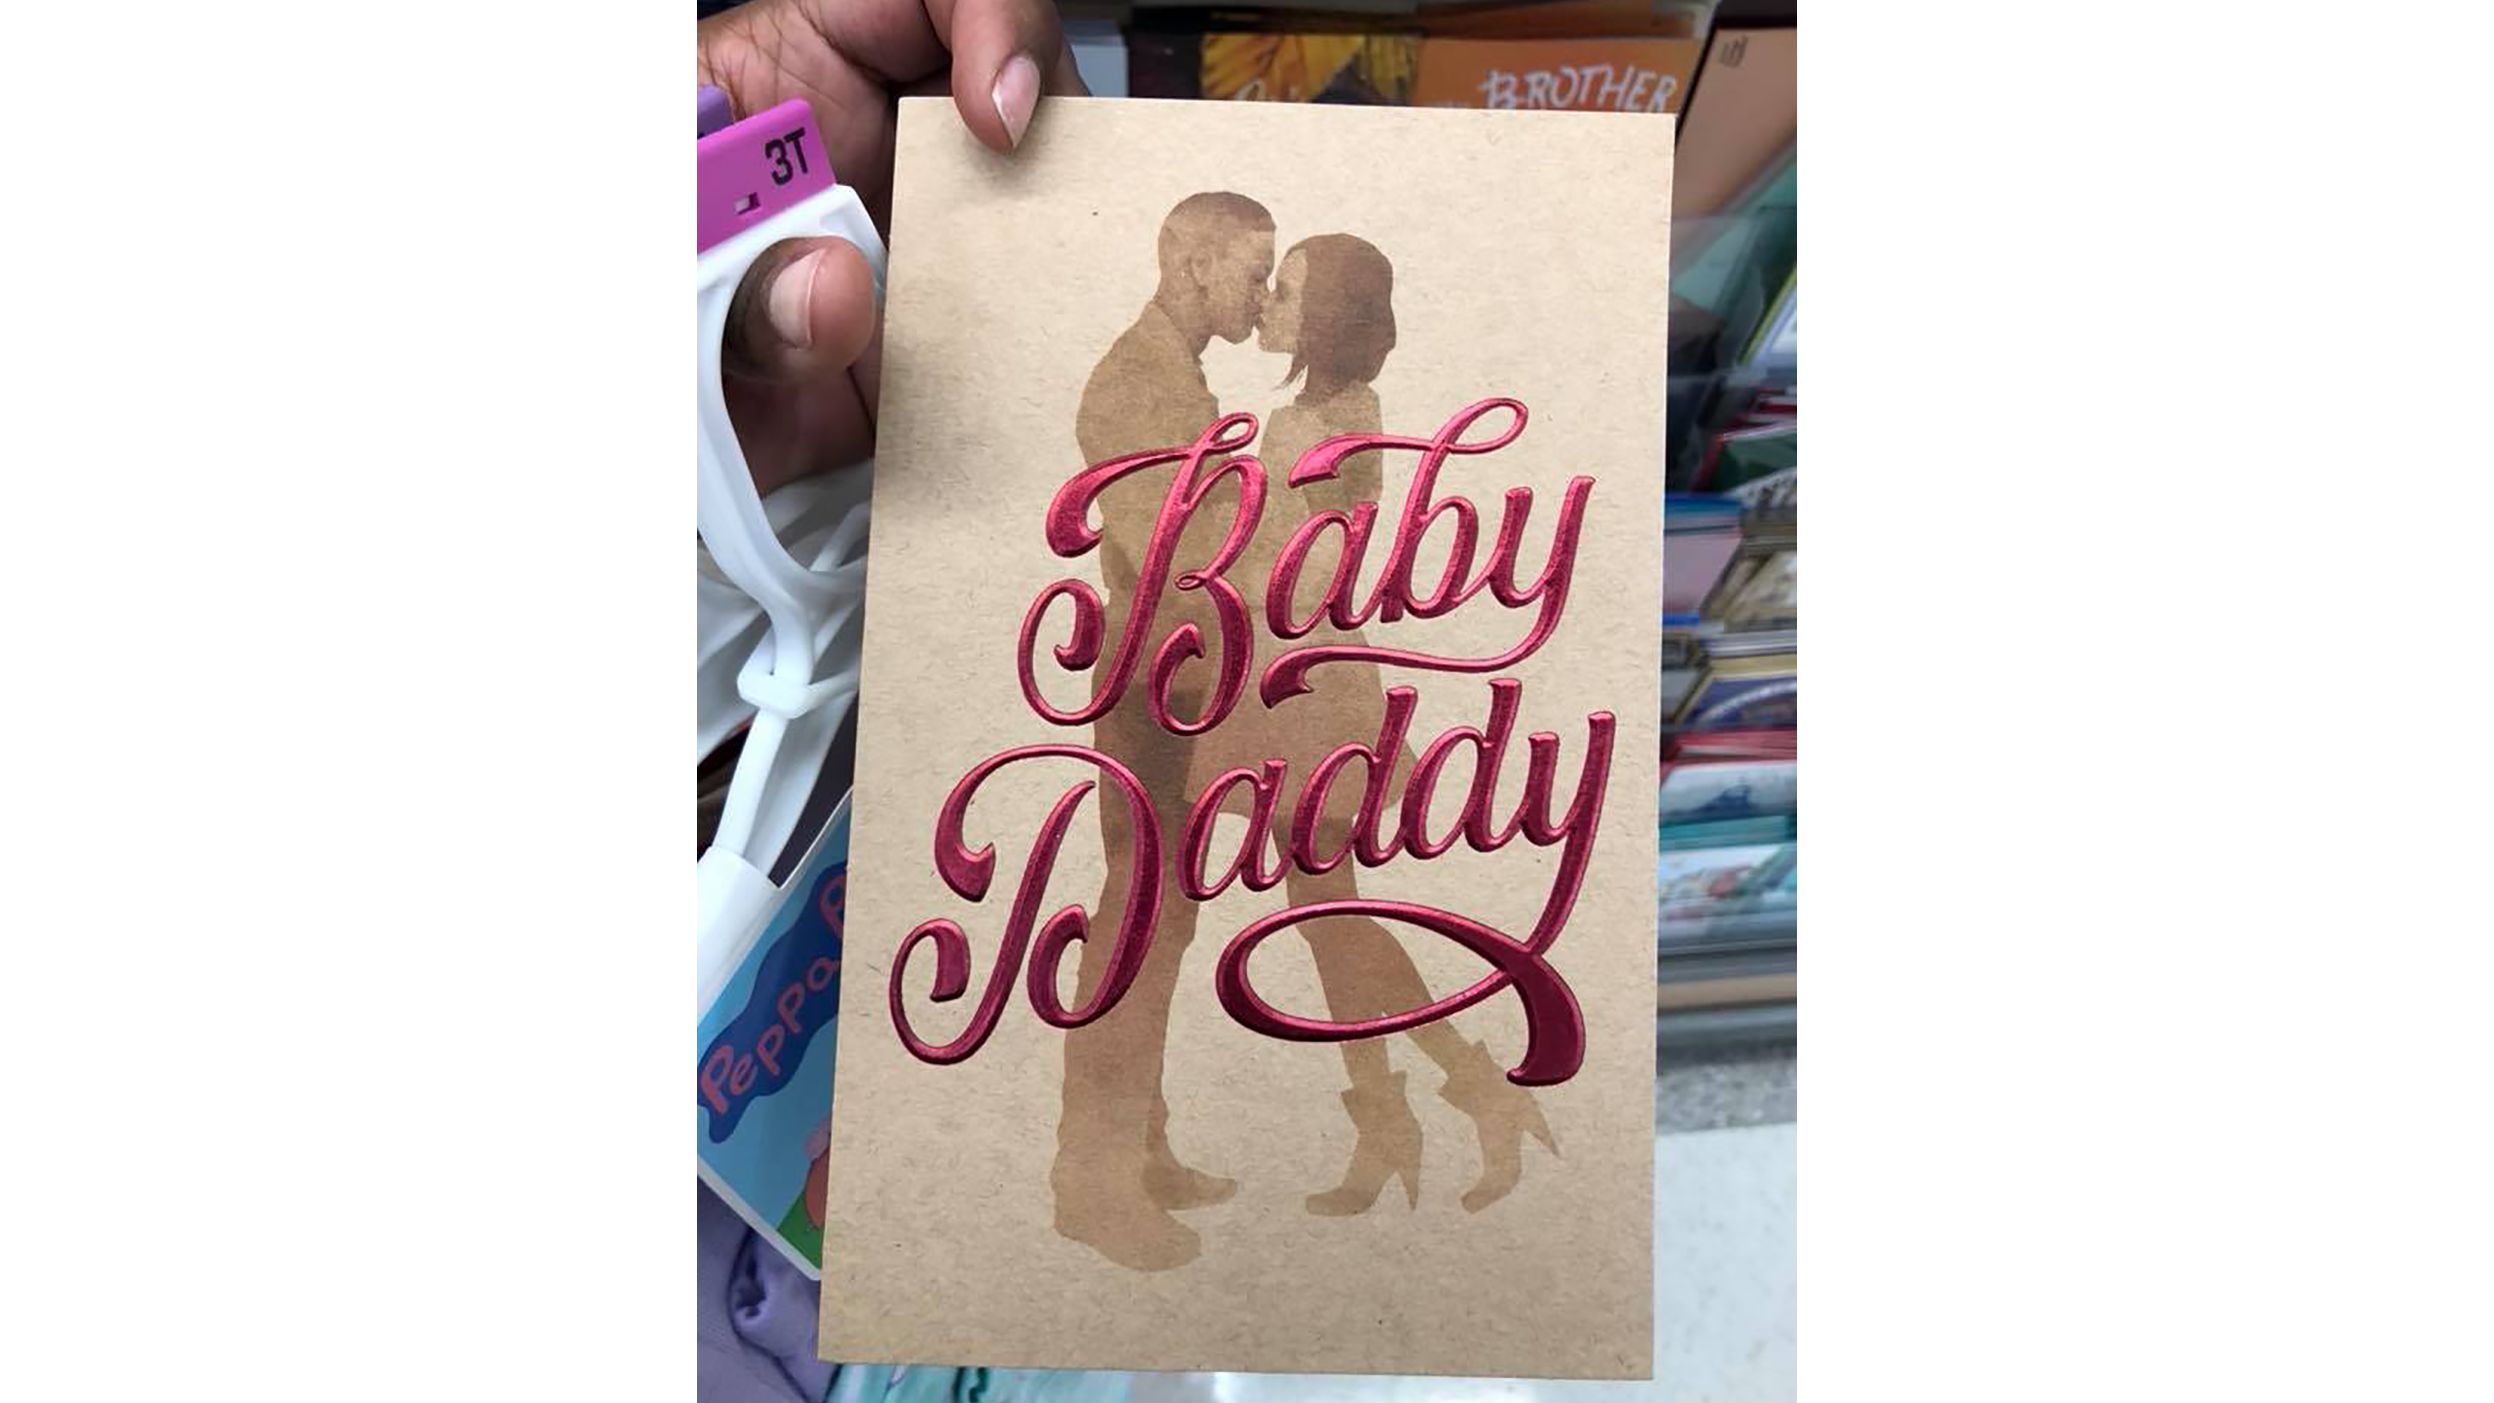 Target says it's pulling this Father's Day greeting card from its stores.